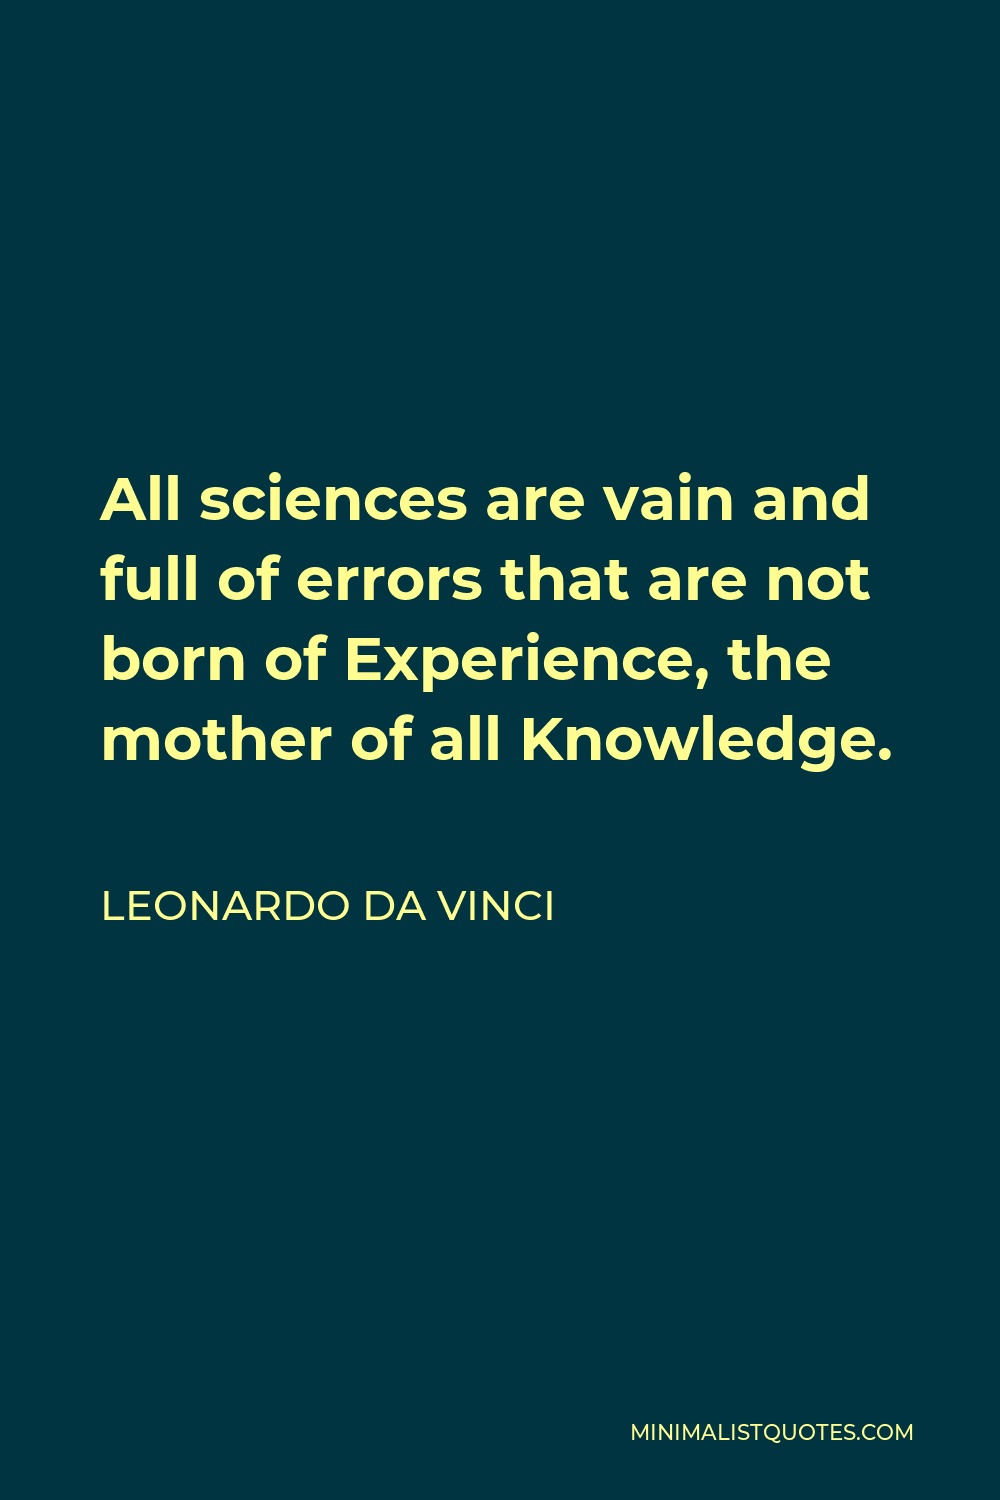 Leonardo da Vinci Quote - All sciences are vain and full of errors that are not born of Experience, the mother of all Knowledge.